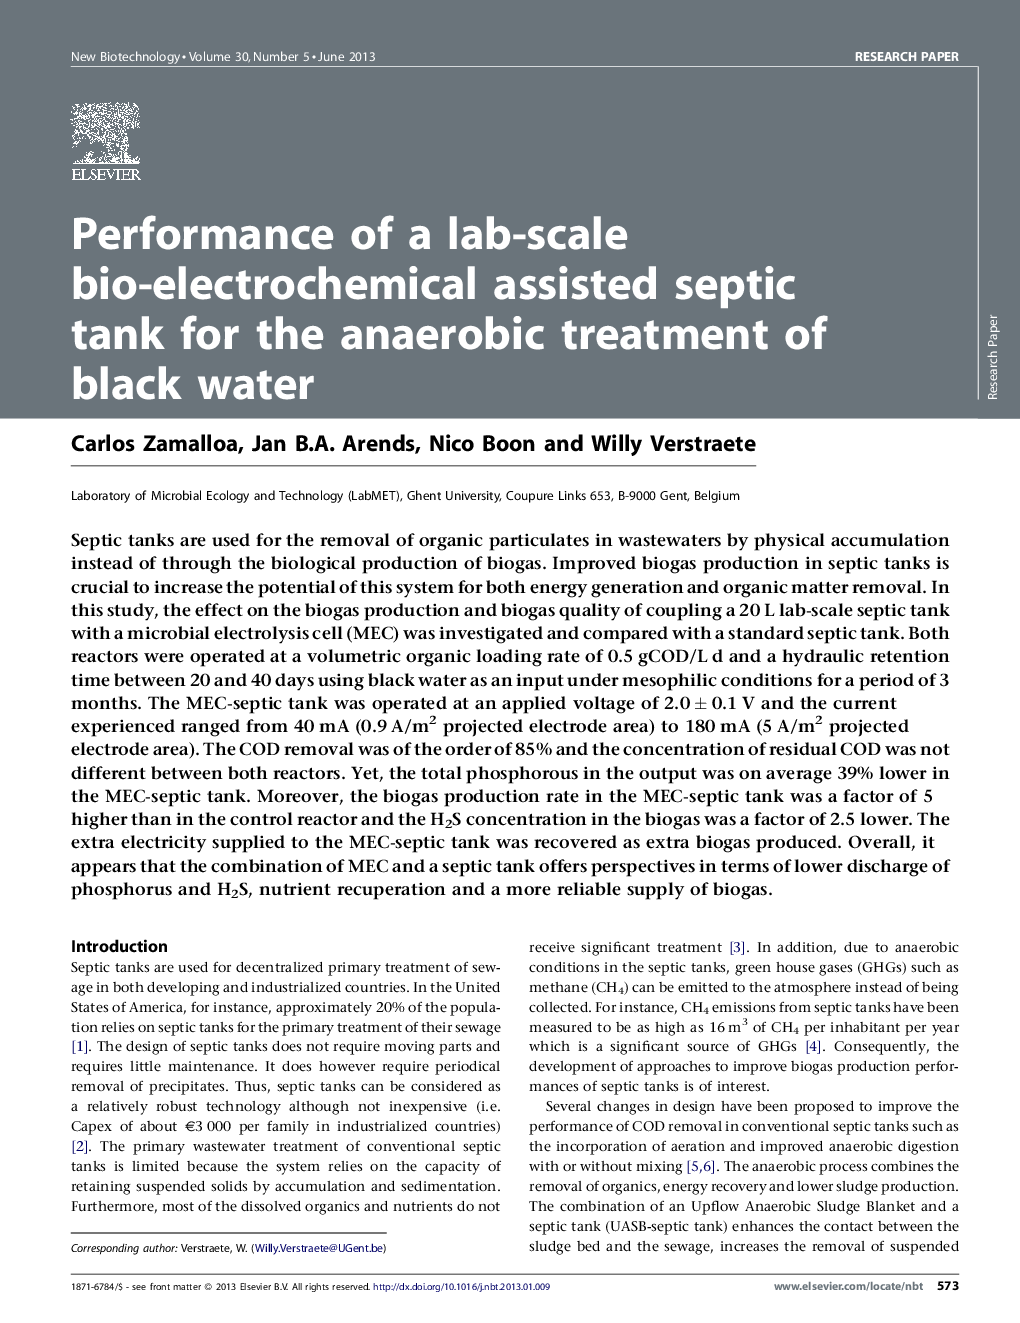 Performance of a lab-scale bio-electrochemical assisted septic tank for the anaerobic treatment of black water